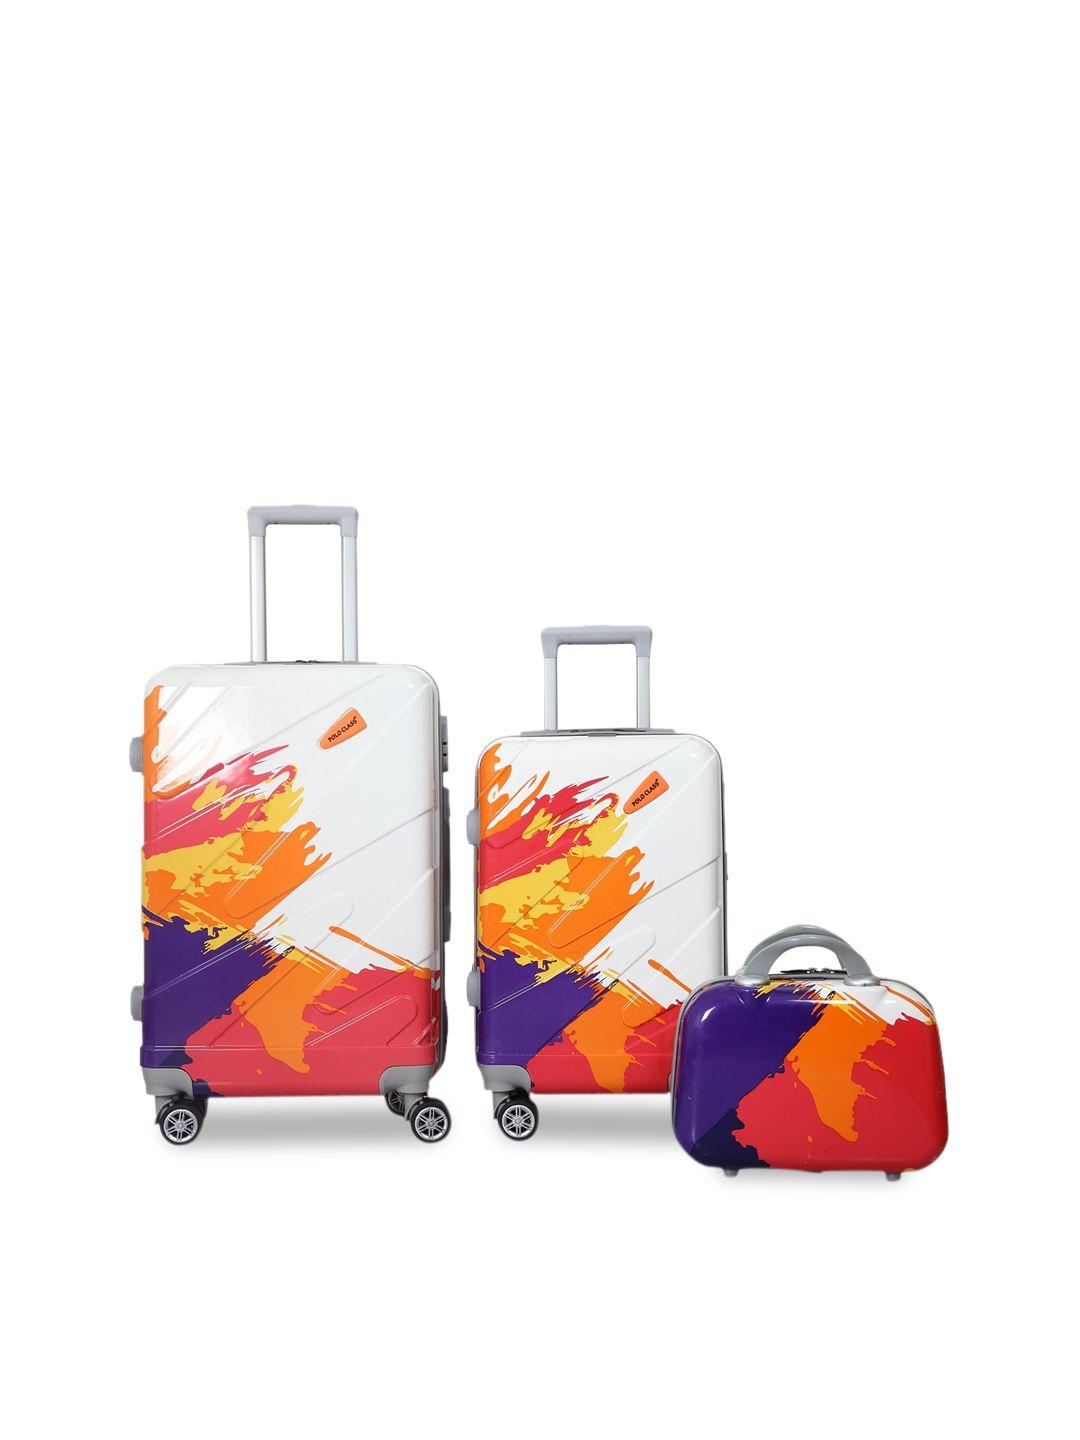 polo class set of 3 printed hard case luggage trolley & vanity bag